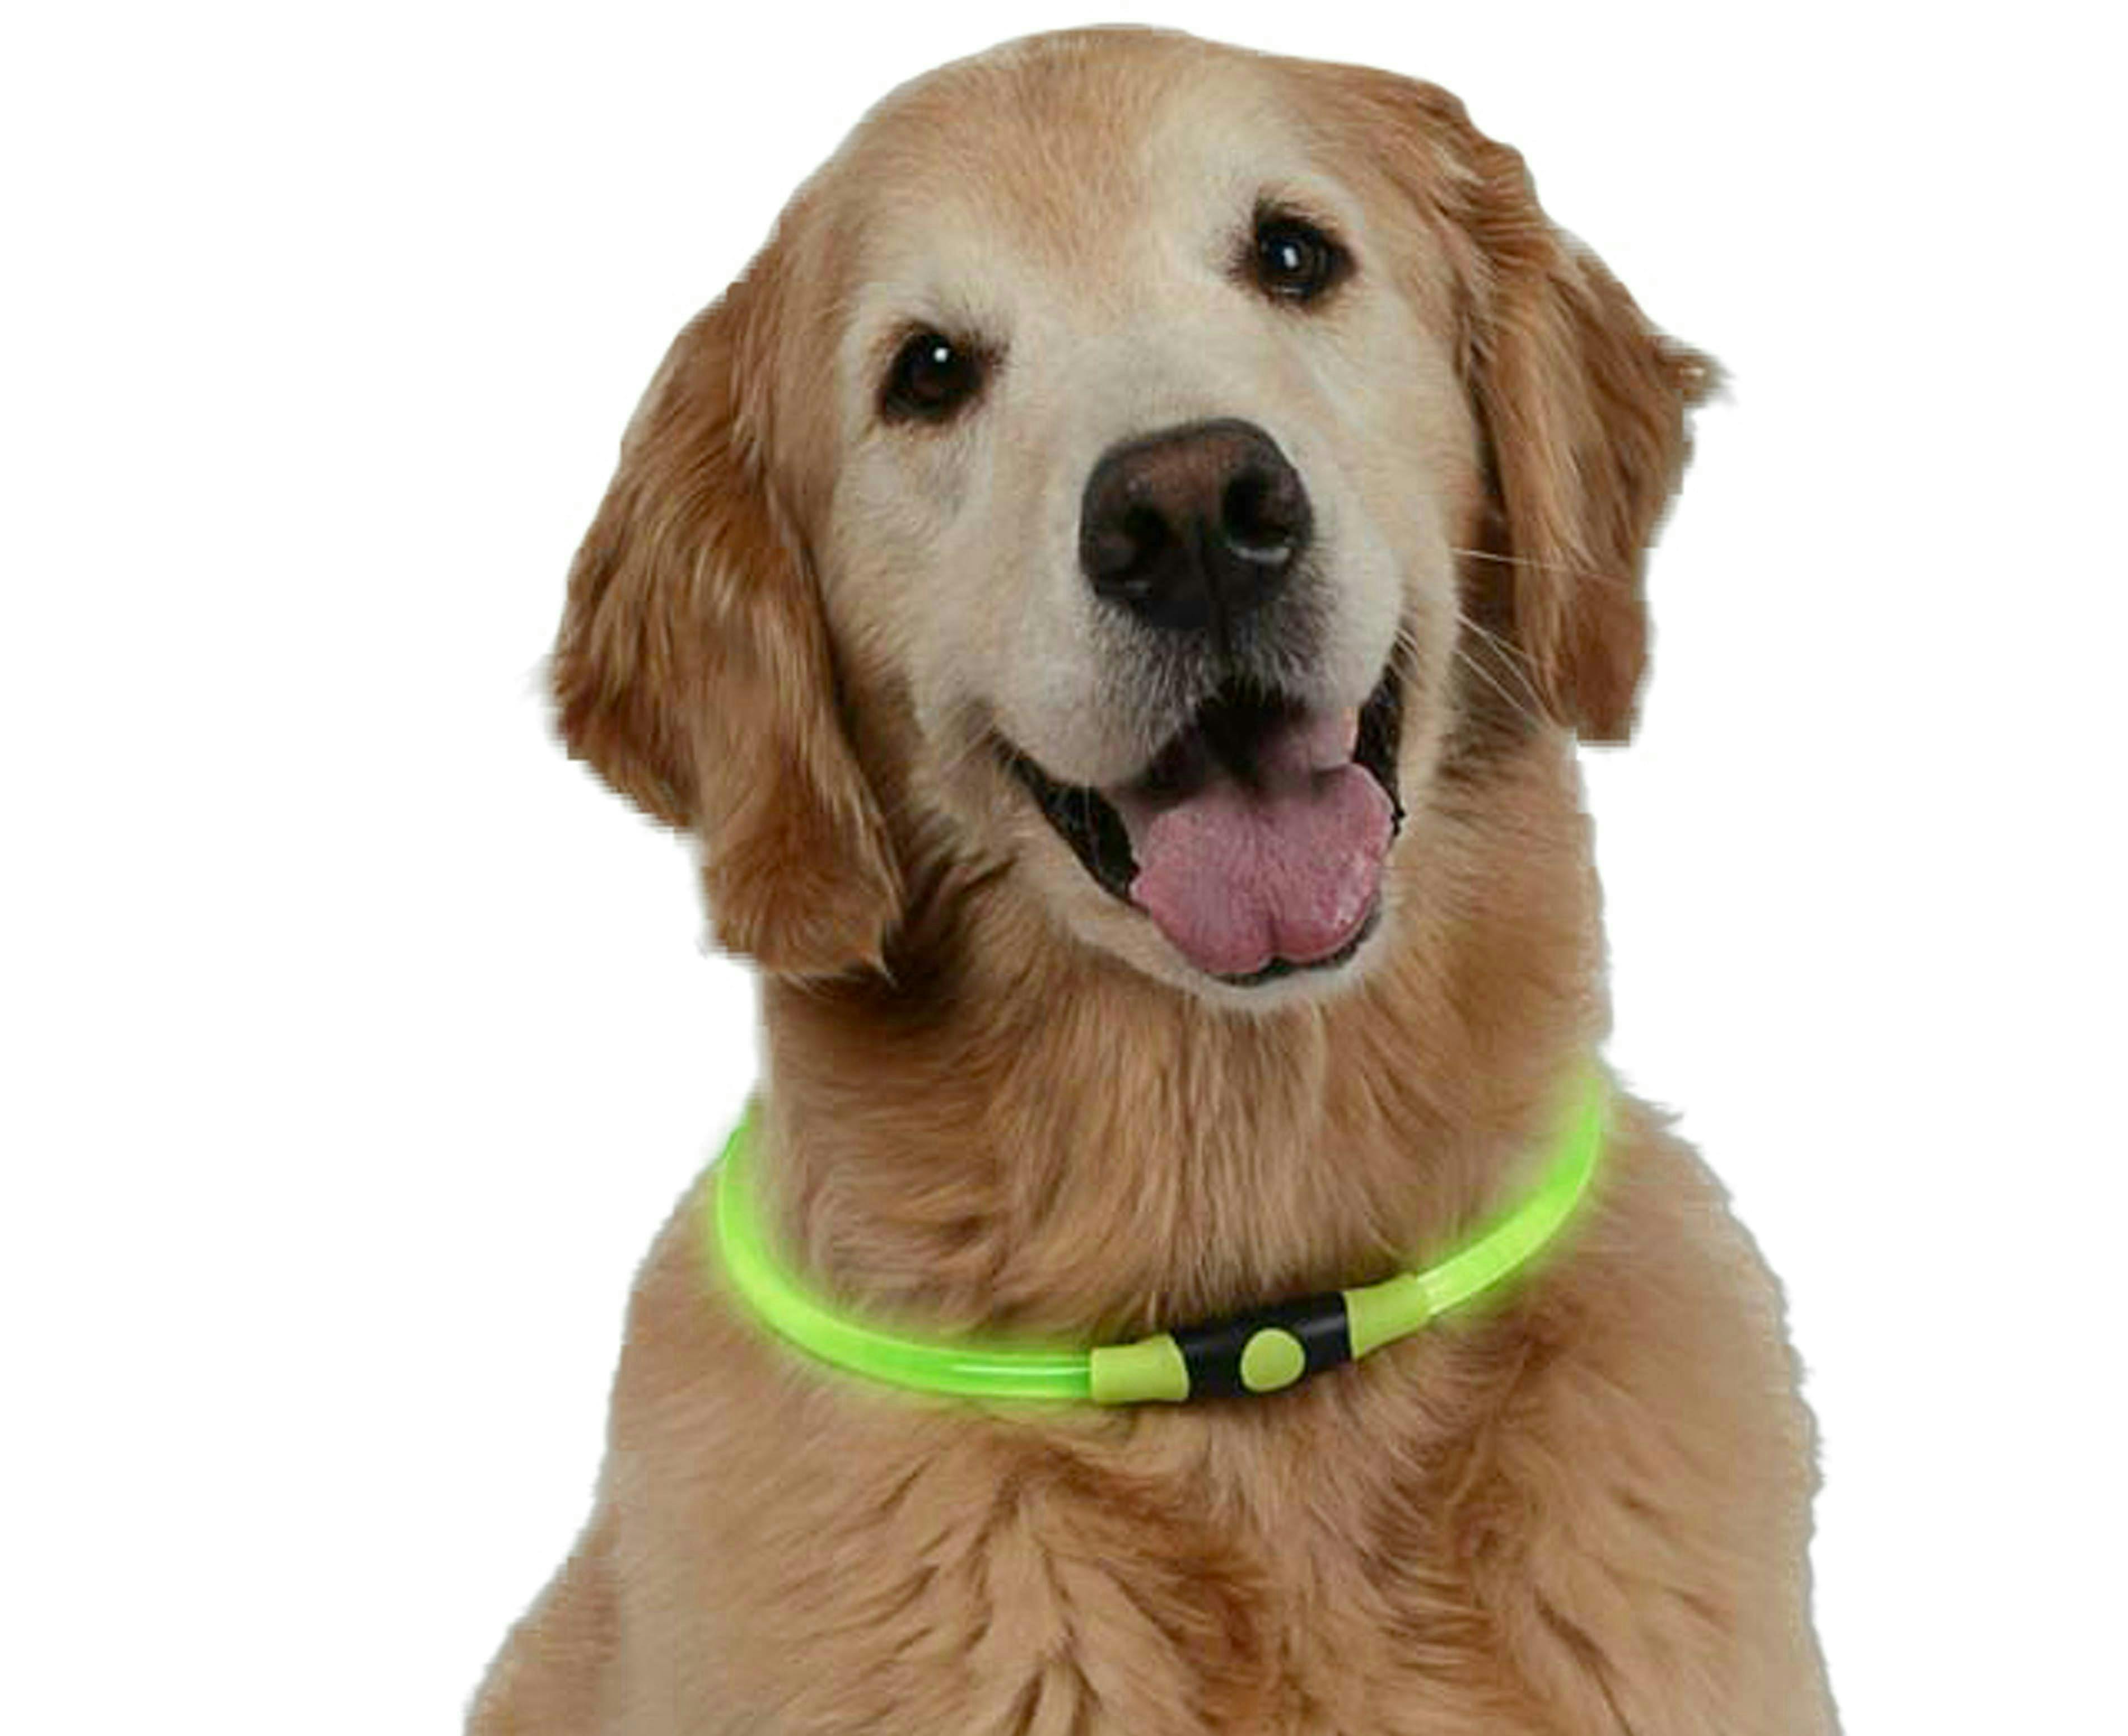 Friendly golden retriever wearing a green safety LED necklace